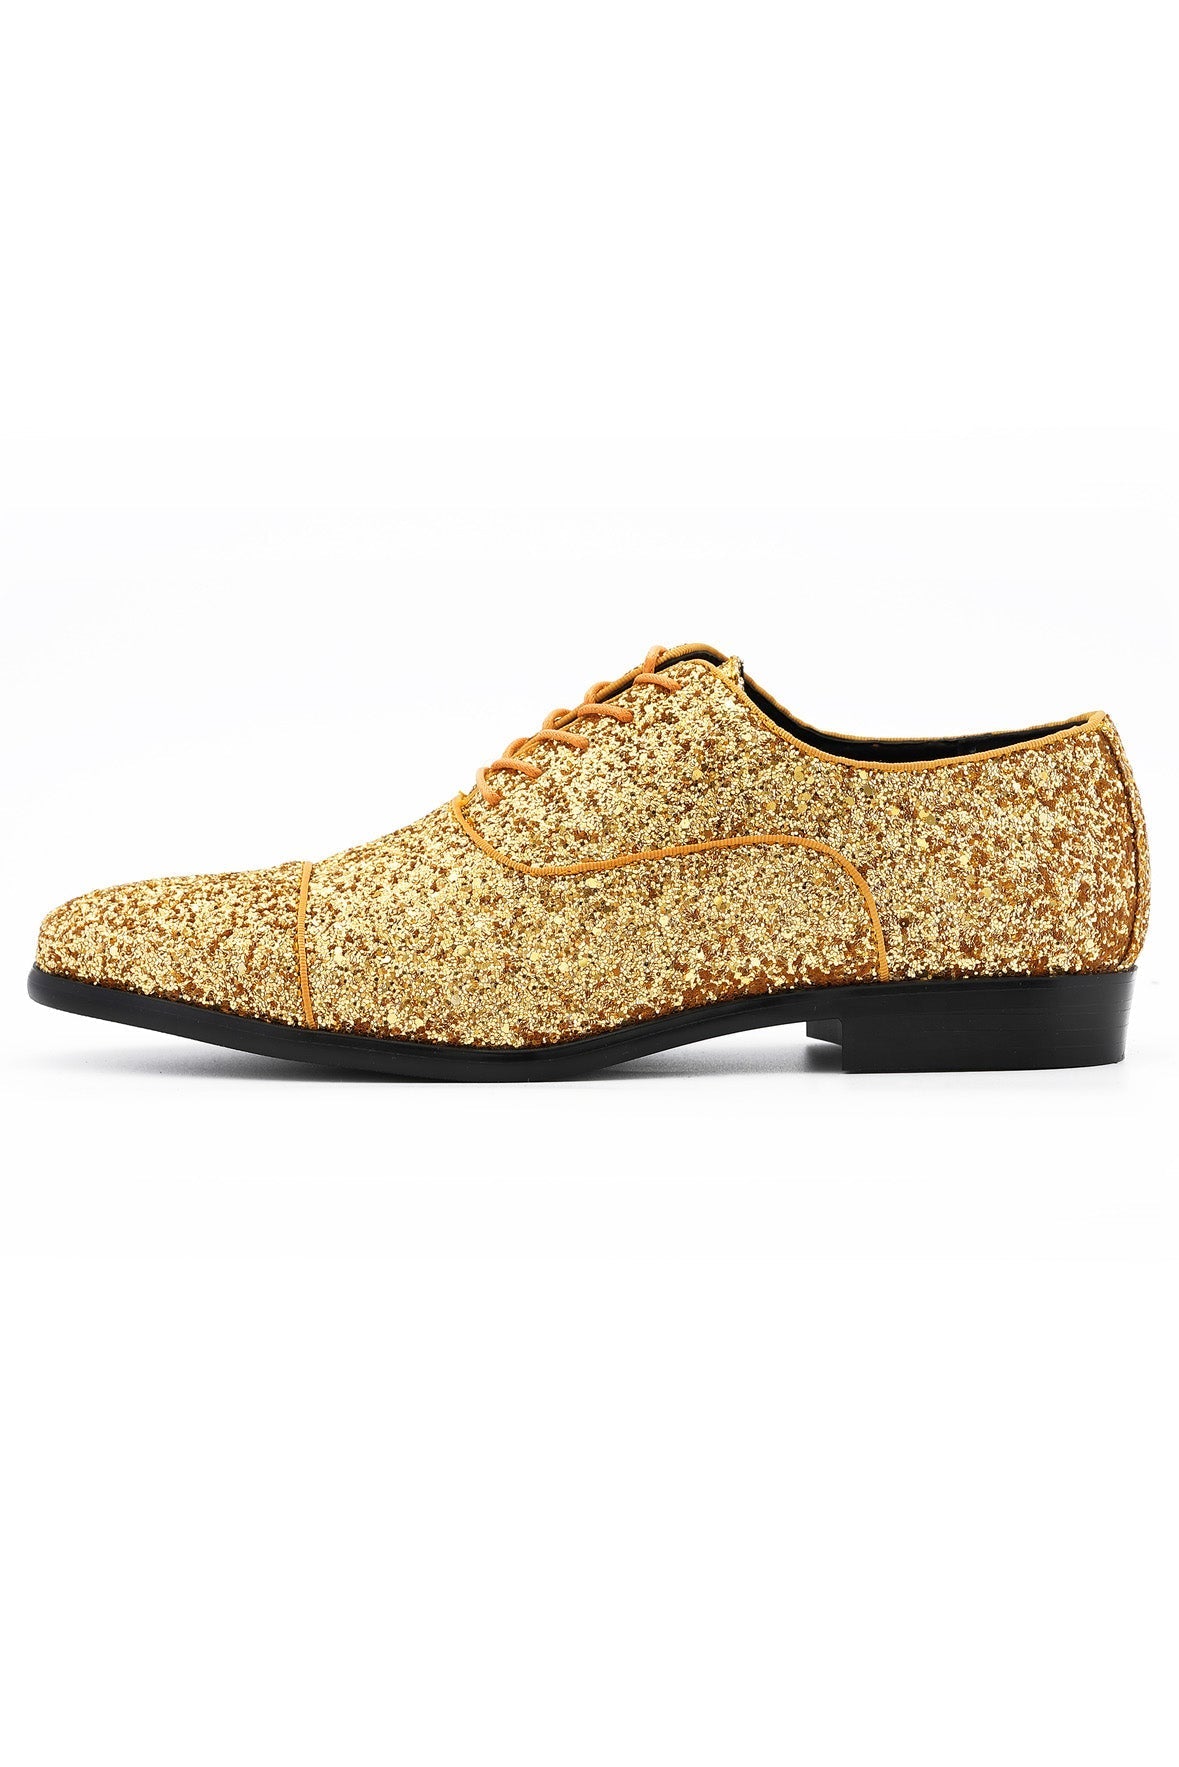 Buy Gold Glitter Toddlers & Kids Girls Slip on Shoes Online in India - Etsy